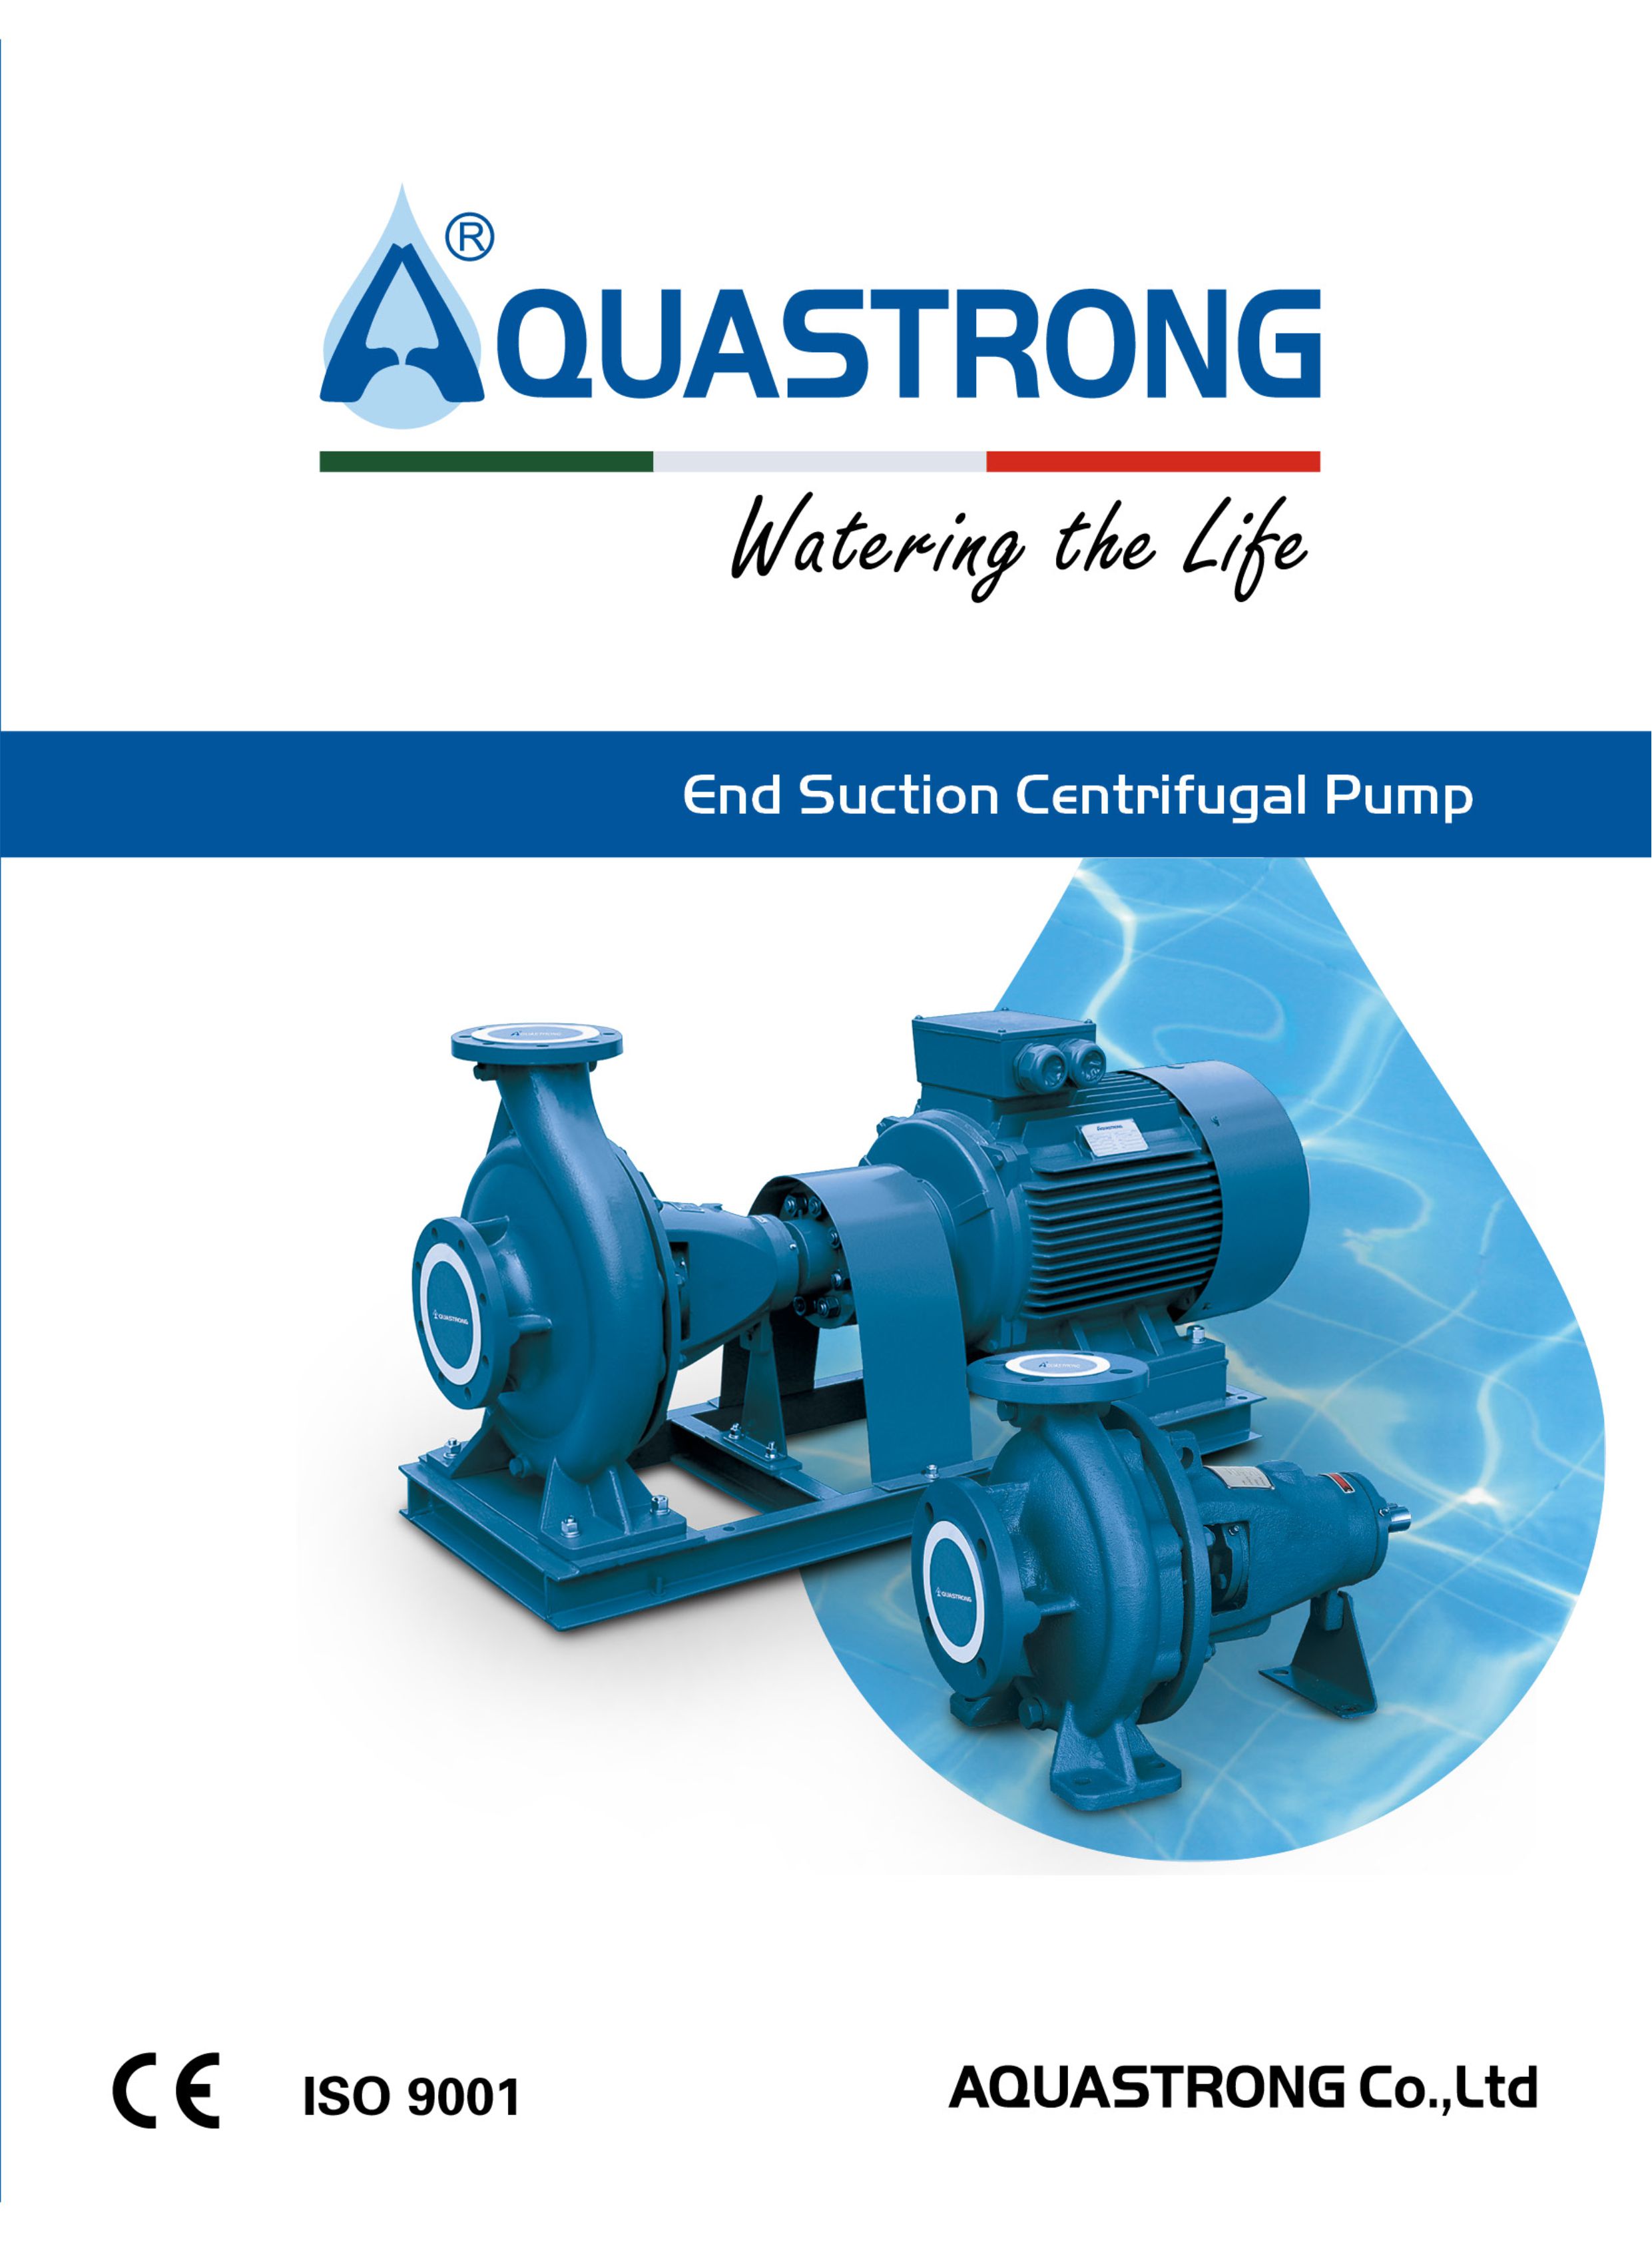 AQUASTRONG--End Suction Centrifugal Pumps2022